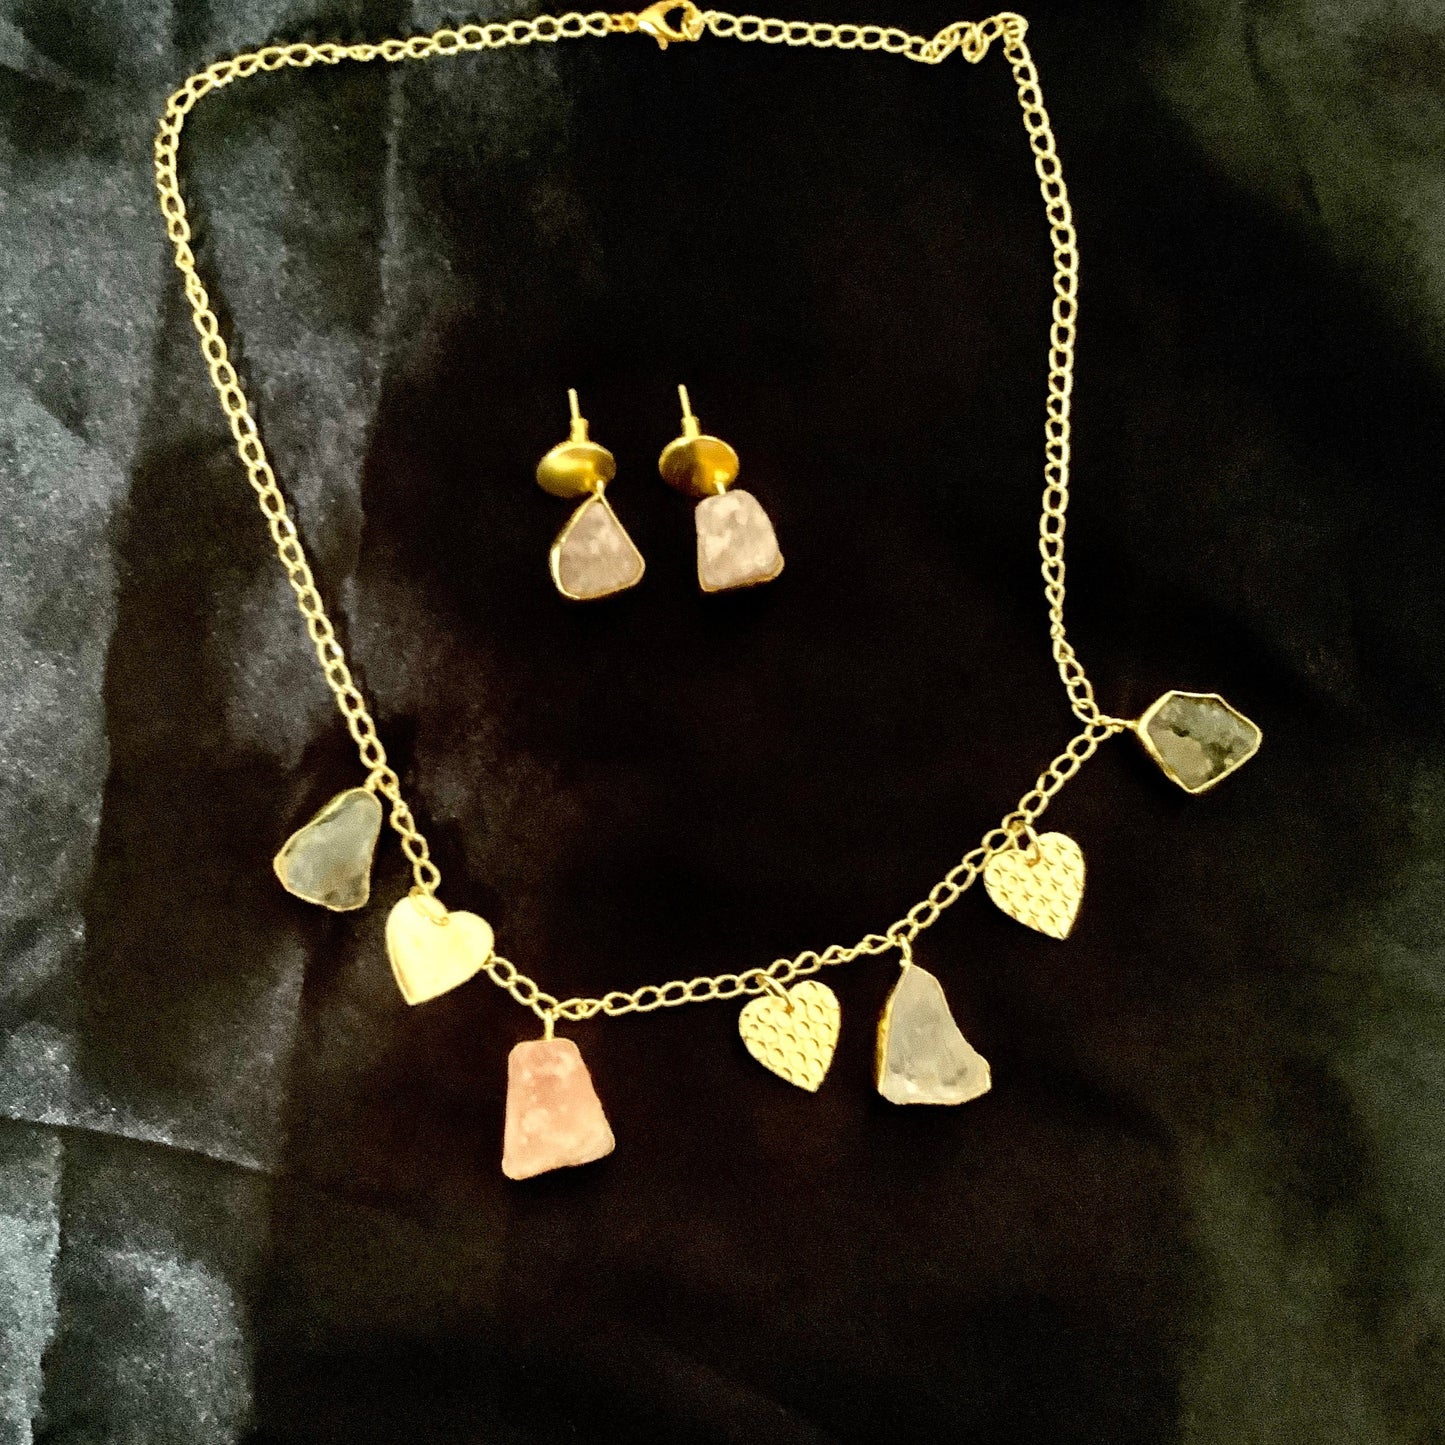 Stone Necklace set with Earrings